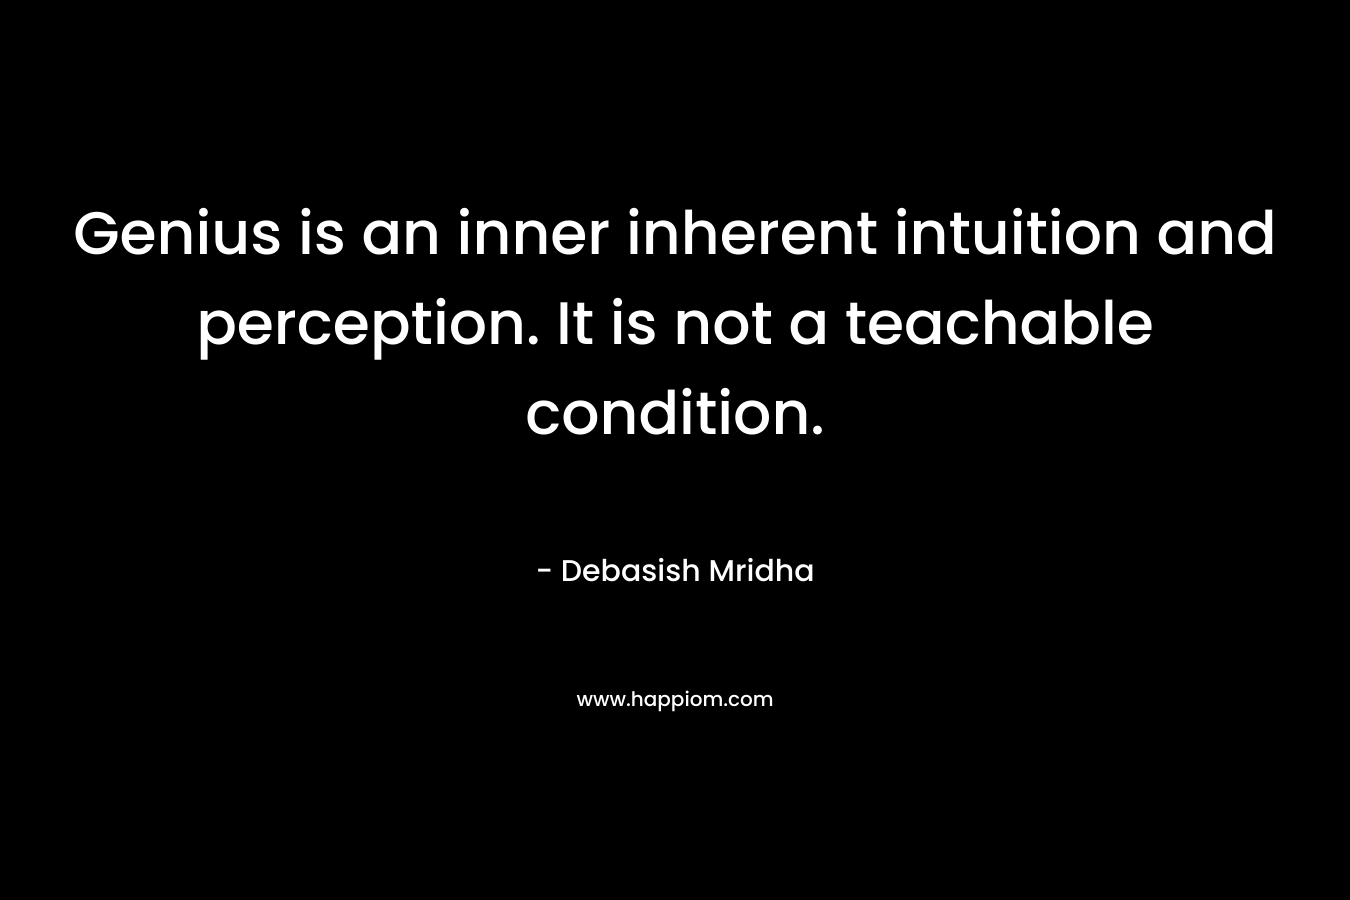 Genius is an inner inherent intuition and perception. It is not a teachable condition.